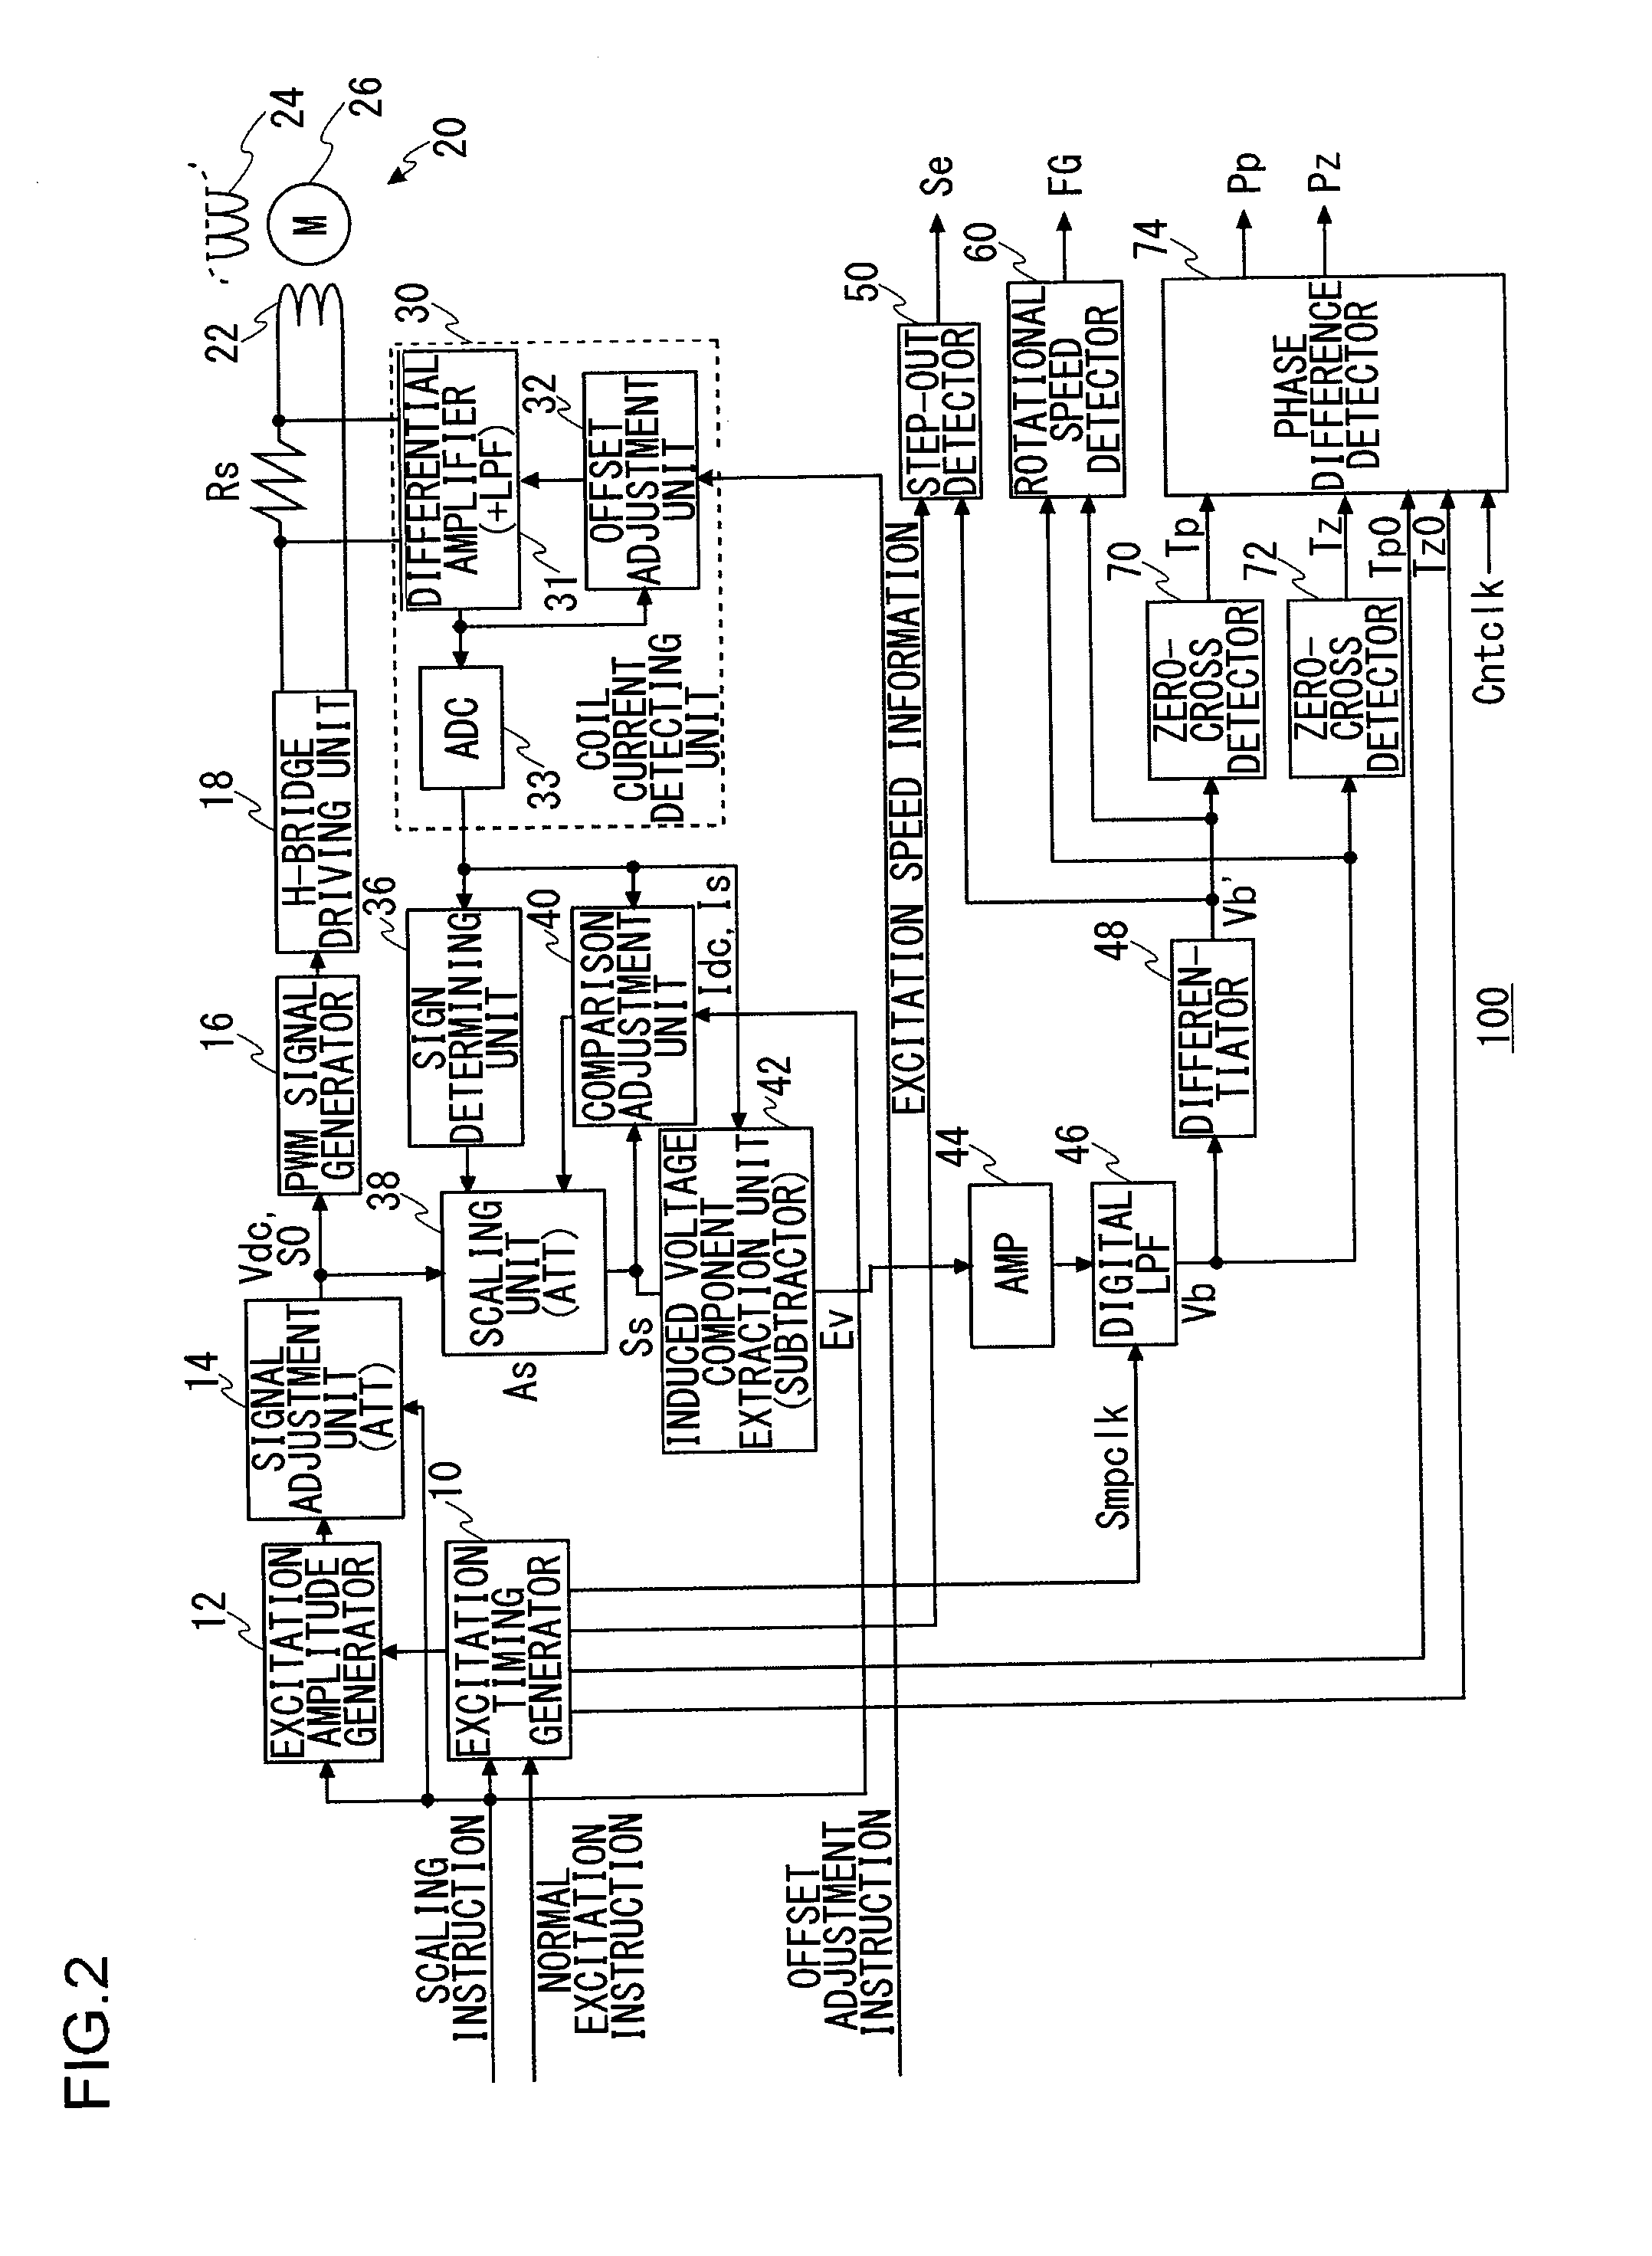 Motor drive circuit for driving a synchronous motor